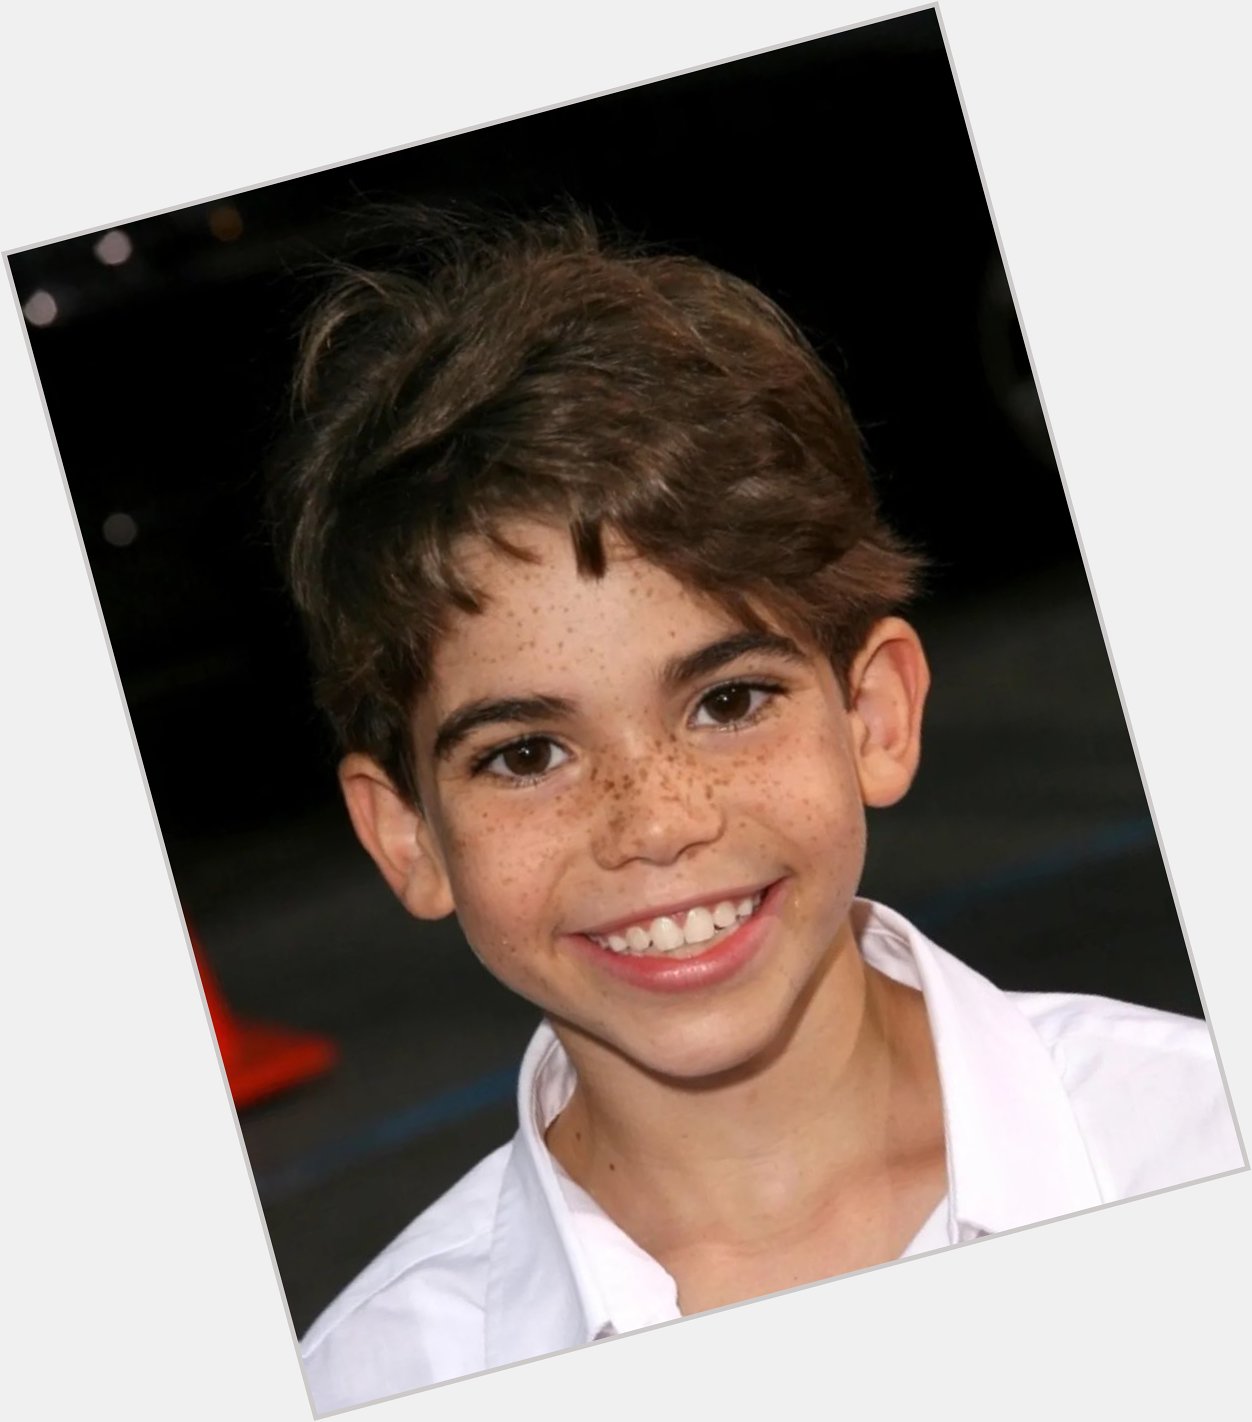 Happy 23rd Birthday to one of the absolute brightest stars, Cameron Boyce   